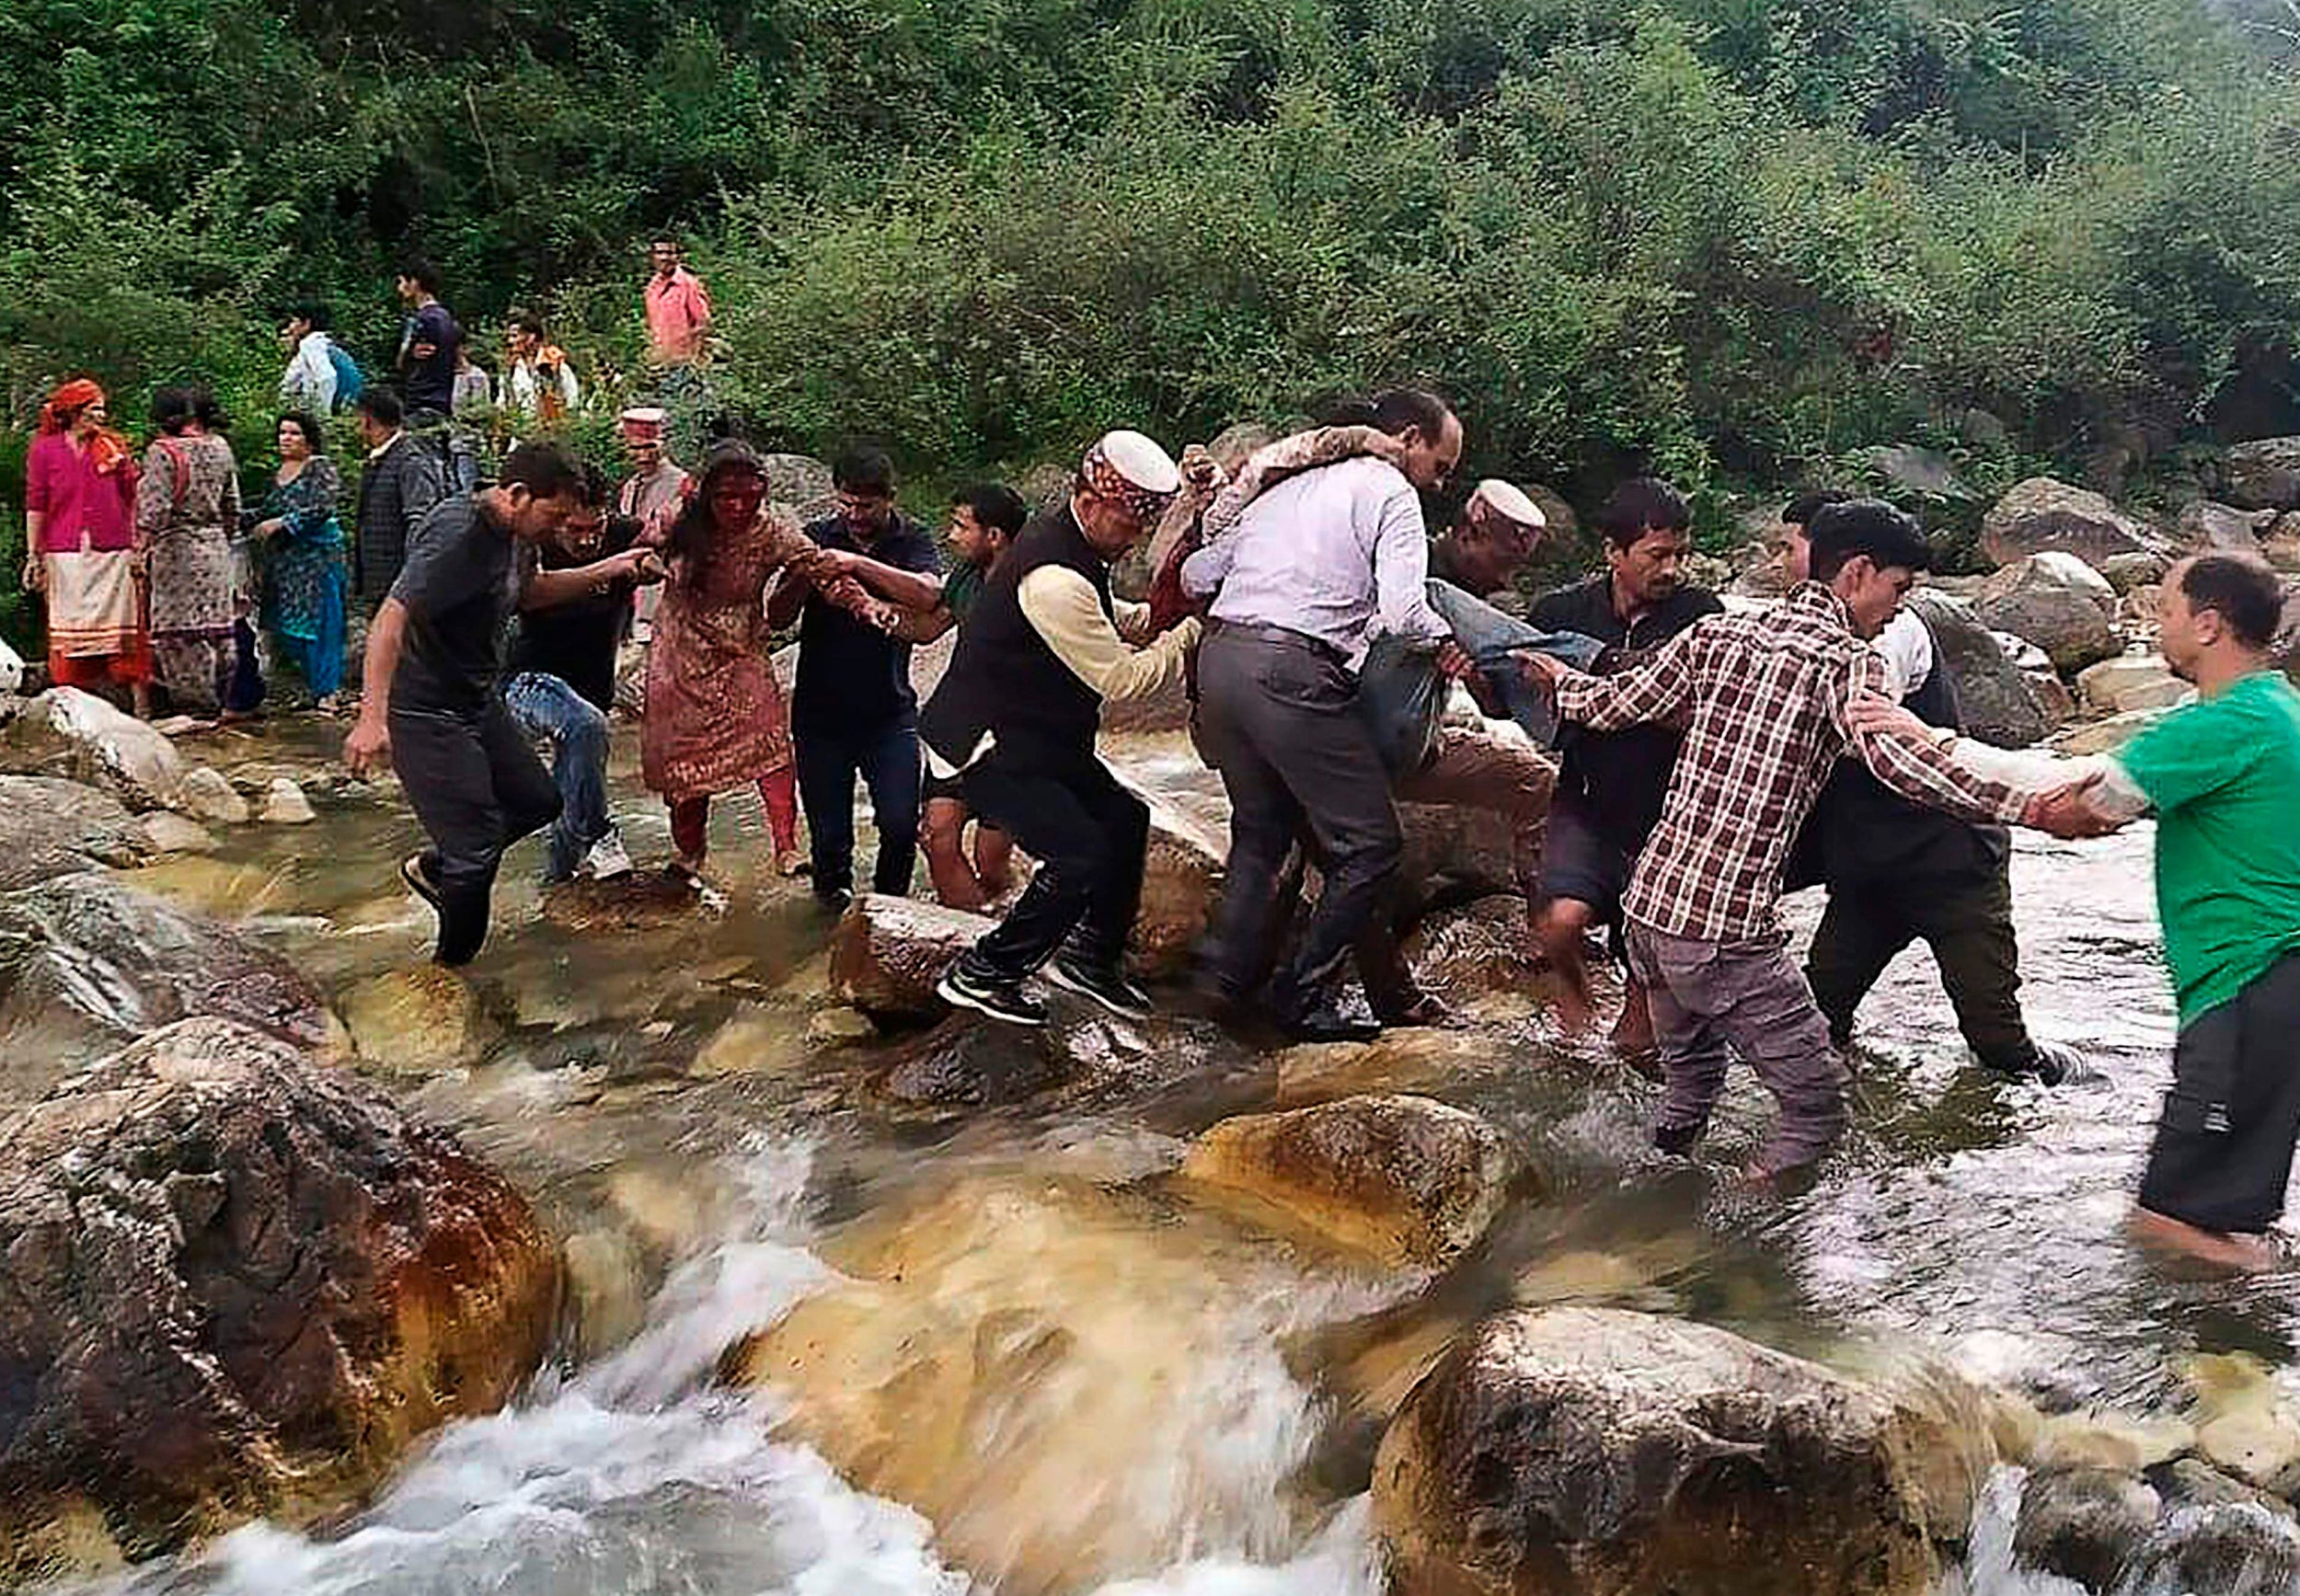 Local residents help accident survivors cross a river after a bus crash in the mountainous Kullu district of the Indian state of Himachal Pradesh